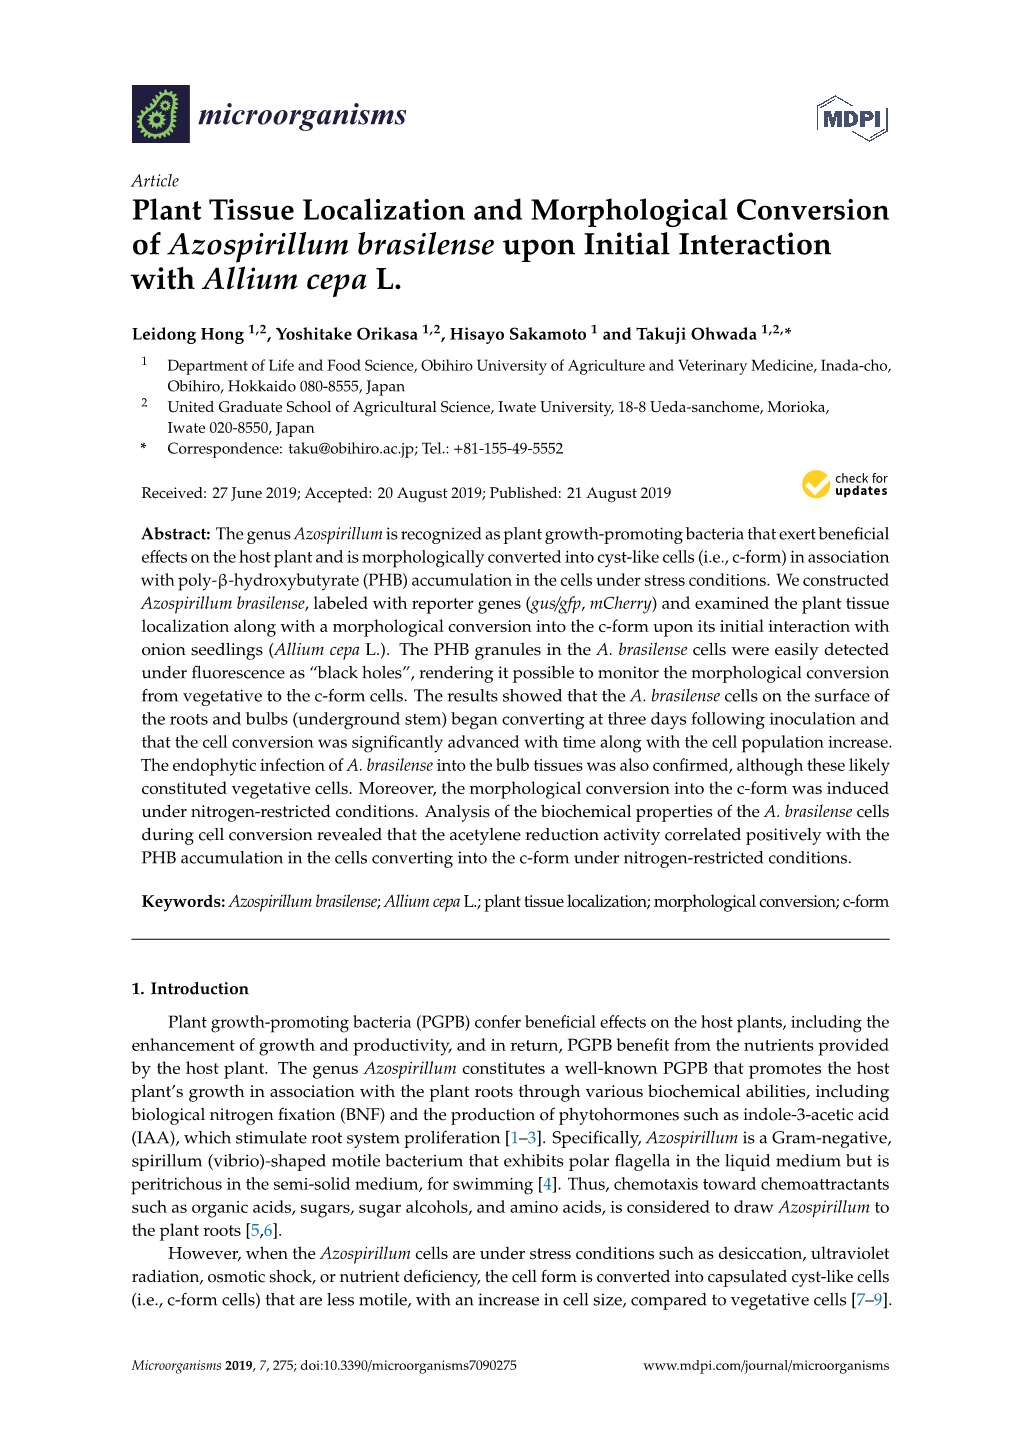 Plant Tissue Localization and Morphological Conversion of Azospirillum Brasilense Upon Initial Interaction with Allium Cepa L